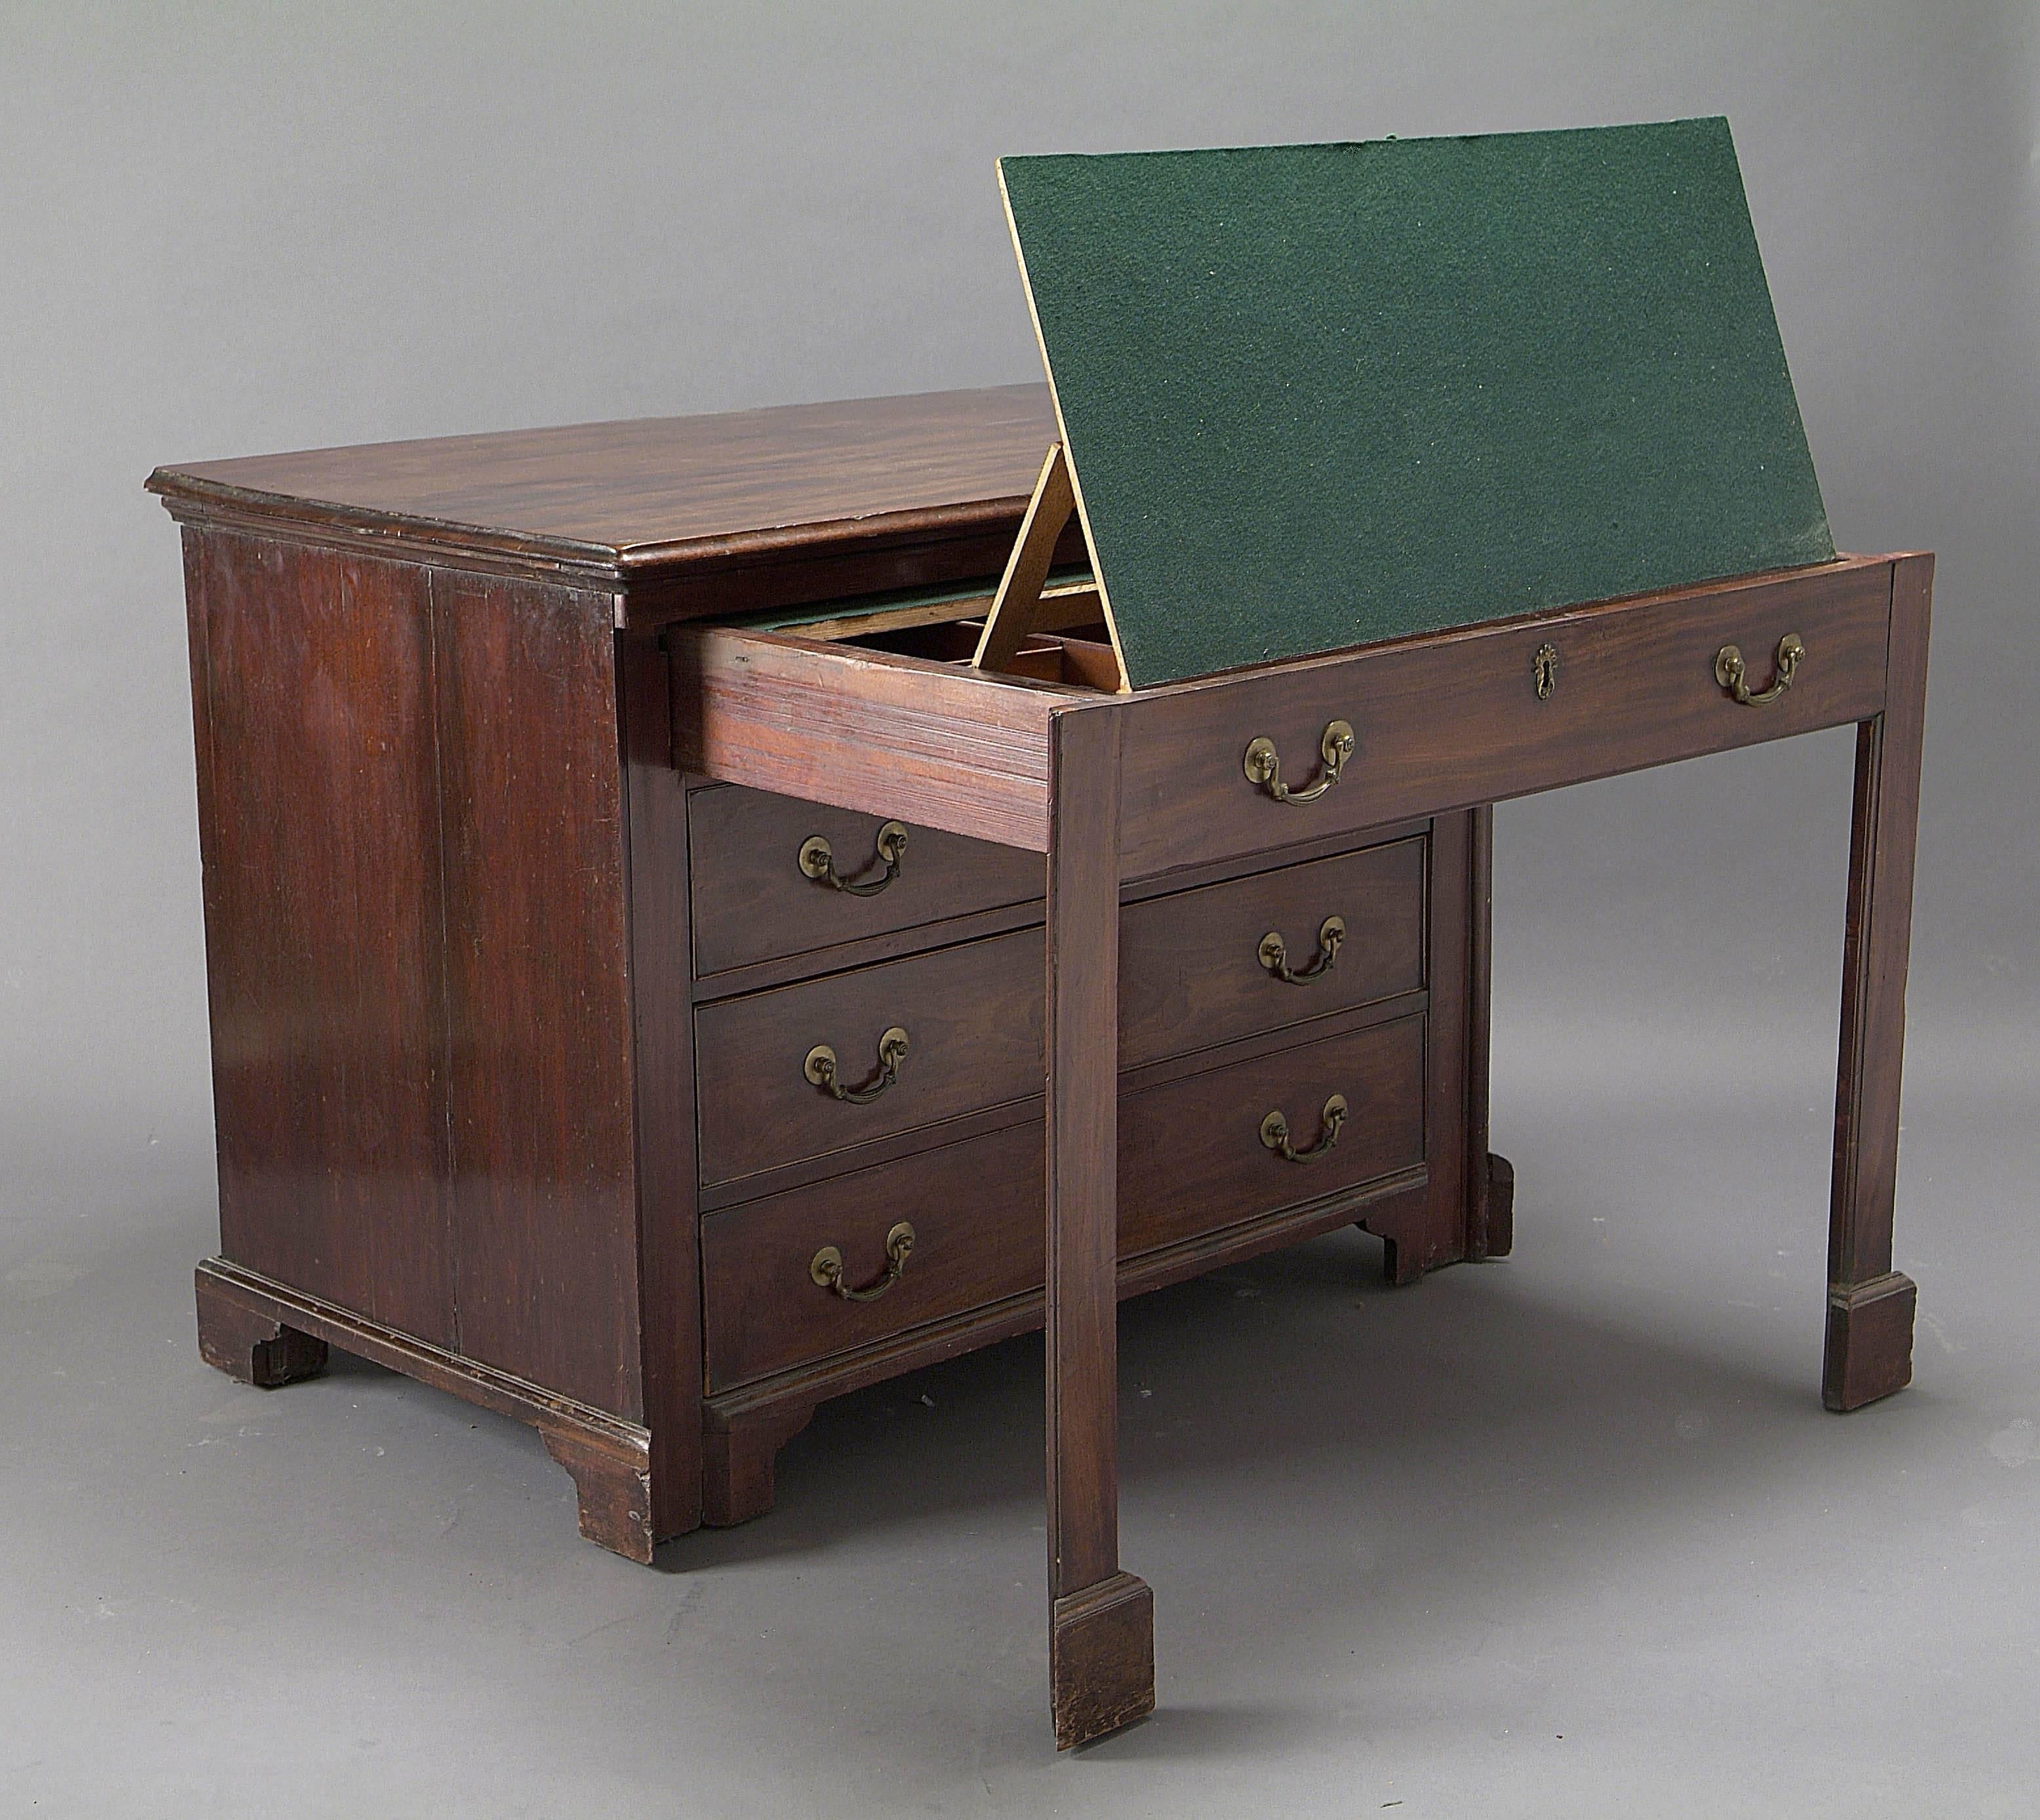 Very exceptional scriban of George III in mahogany from Cuba piece of furniture with many systems it opens by a large drawer forming a reading table and then presents a desk a rare piece of furniture because it has a chest of drawers part.